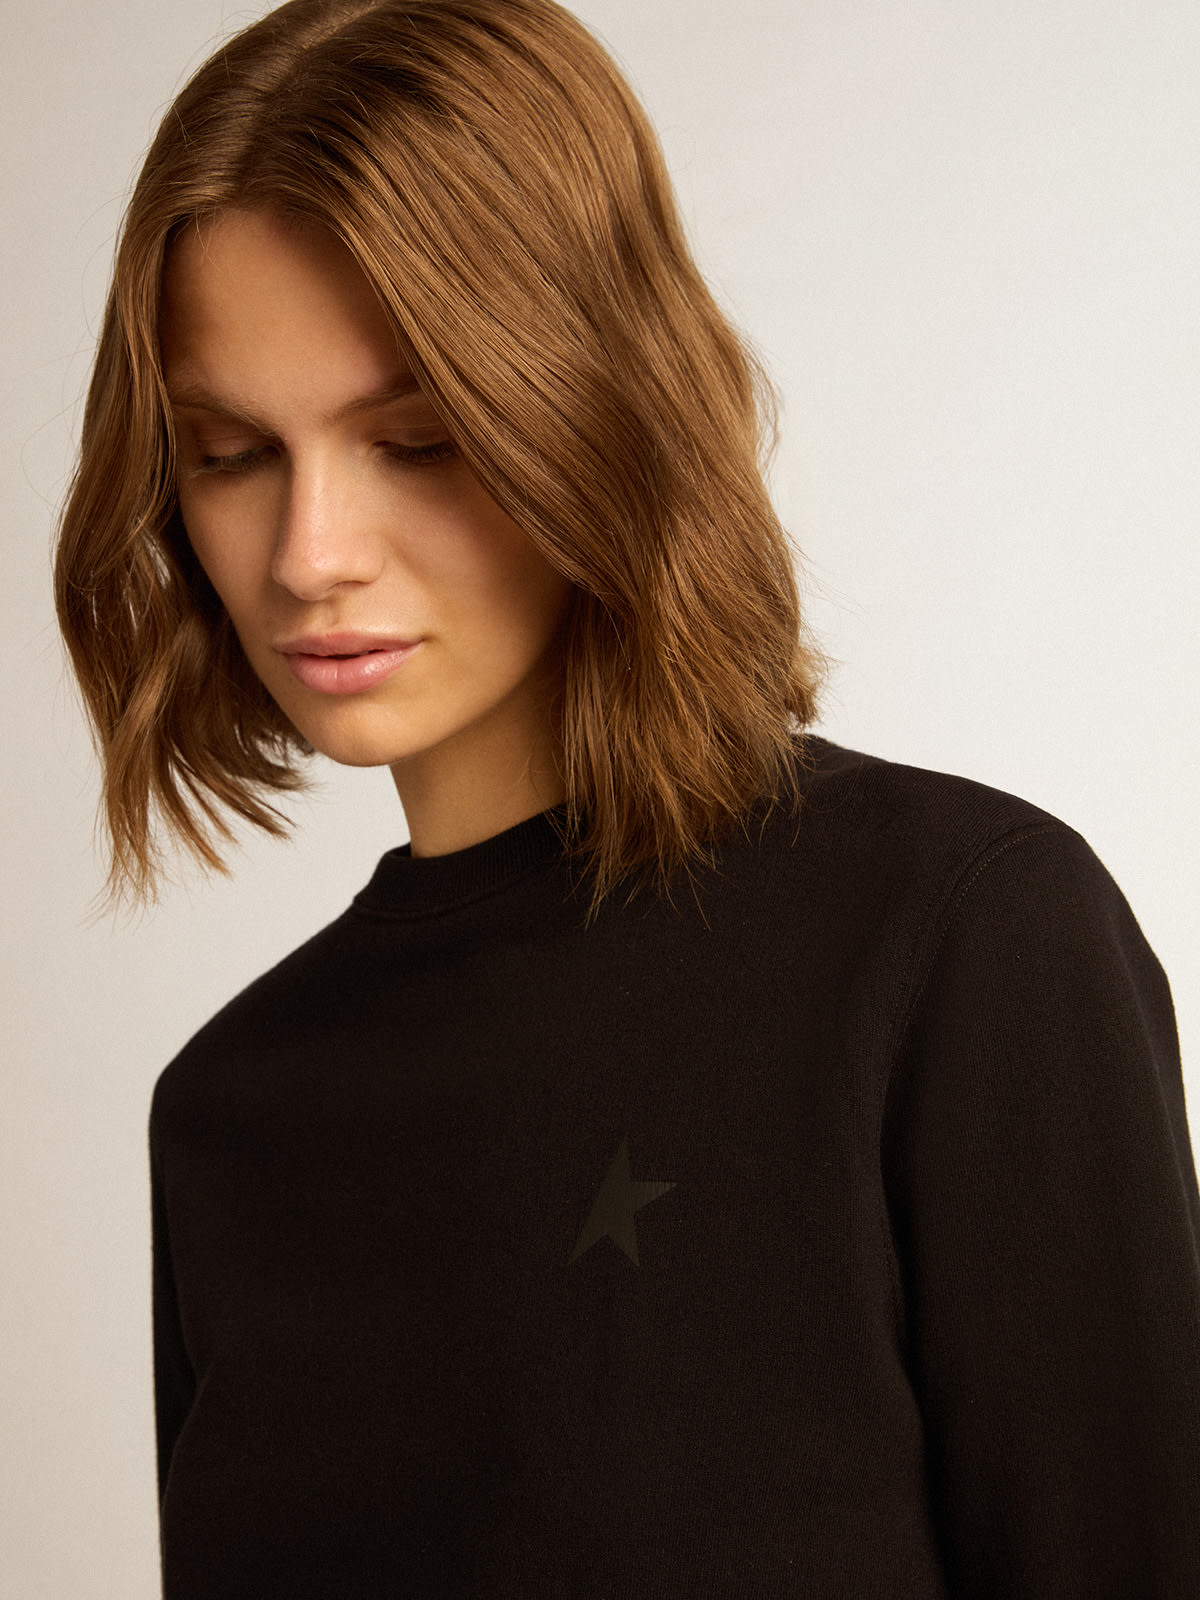 Golden Goose - Black Athena Star Collection sweatshirt with tone-on-tone star on the front in 